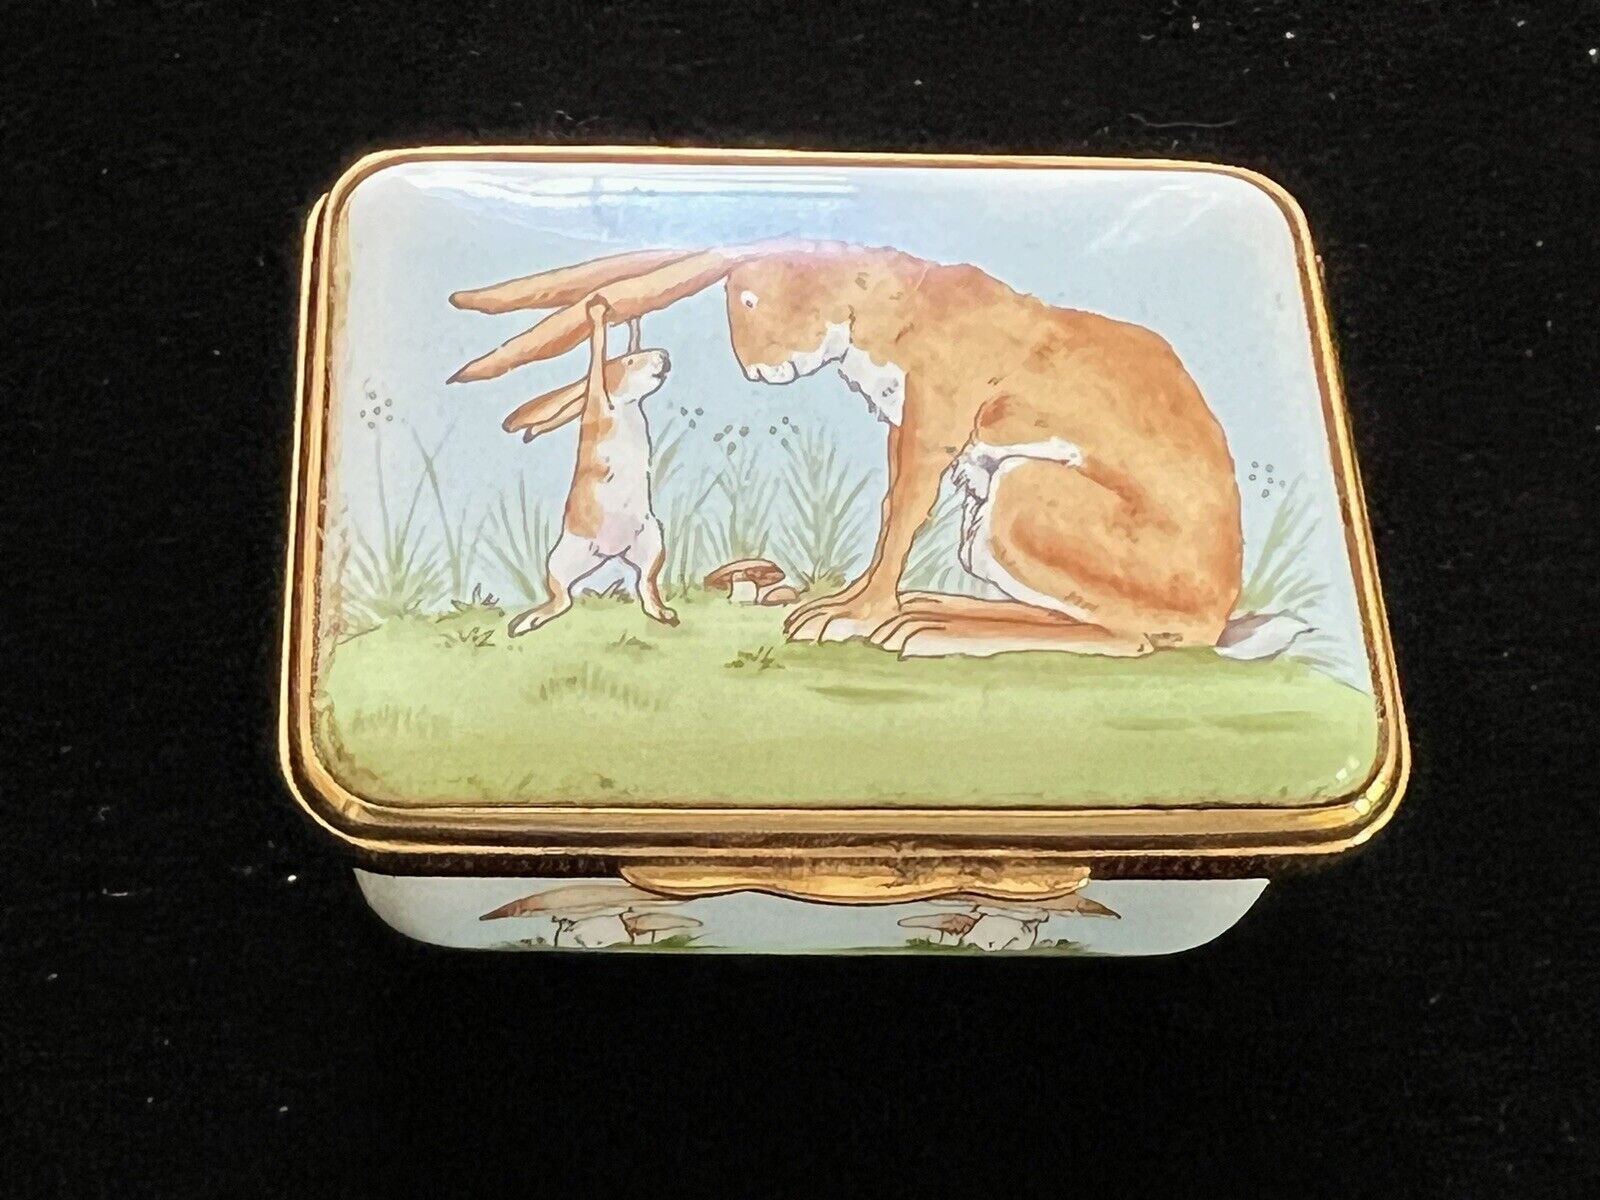 Rare Halcyon Days Nutbrown Hare GUESS HOW MUCH I LOVE YOU Enamel Trinket Box